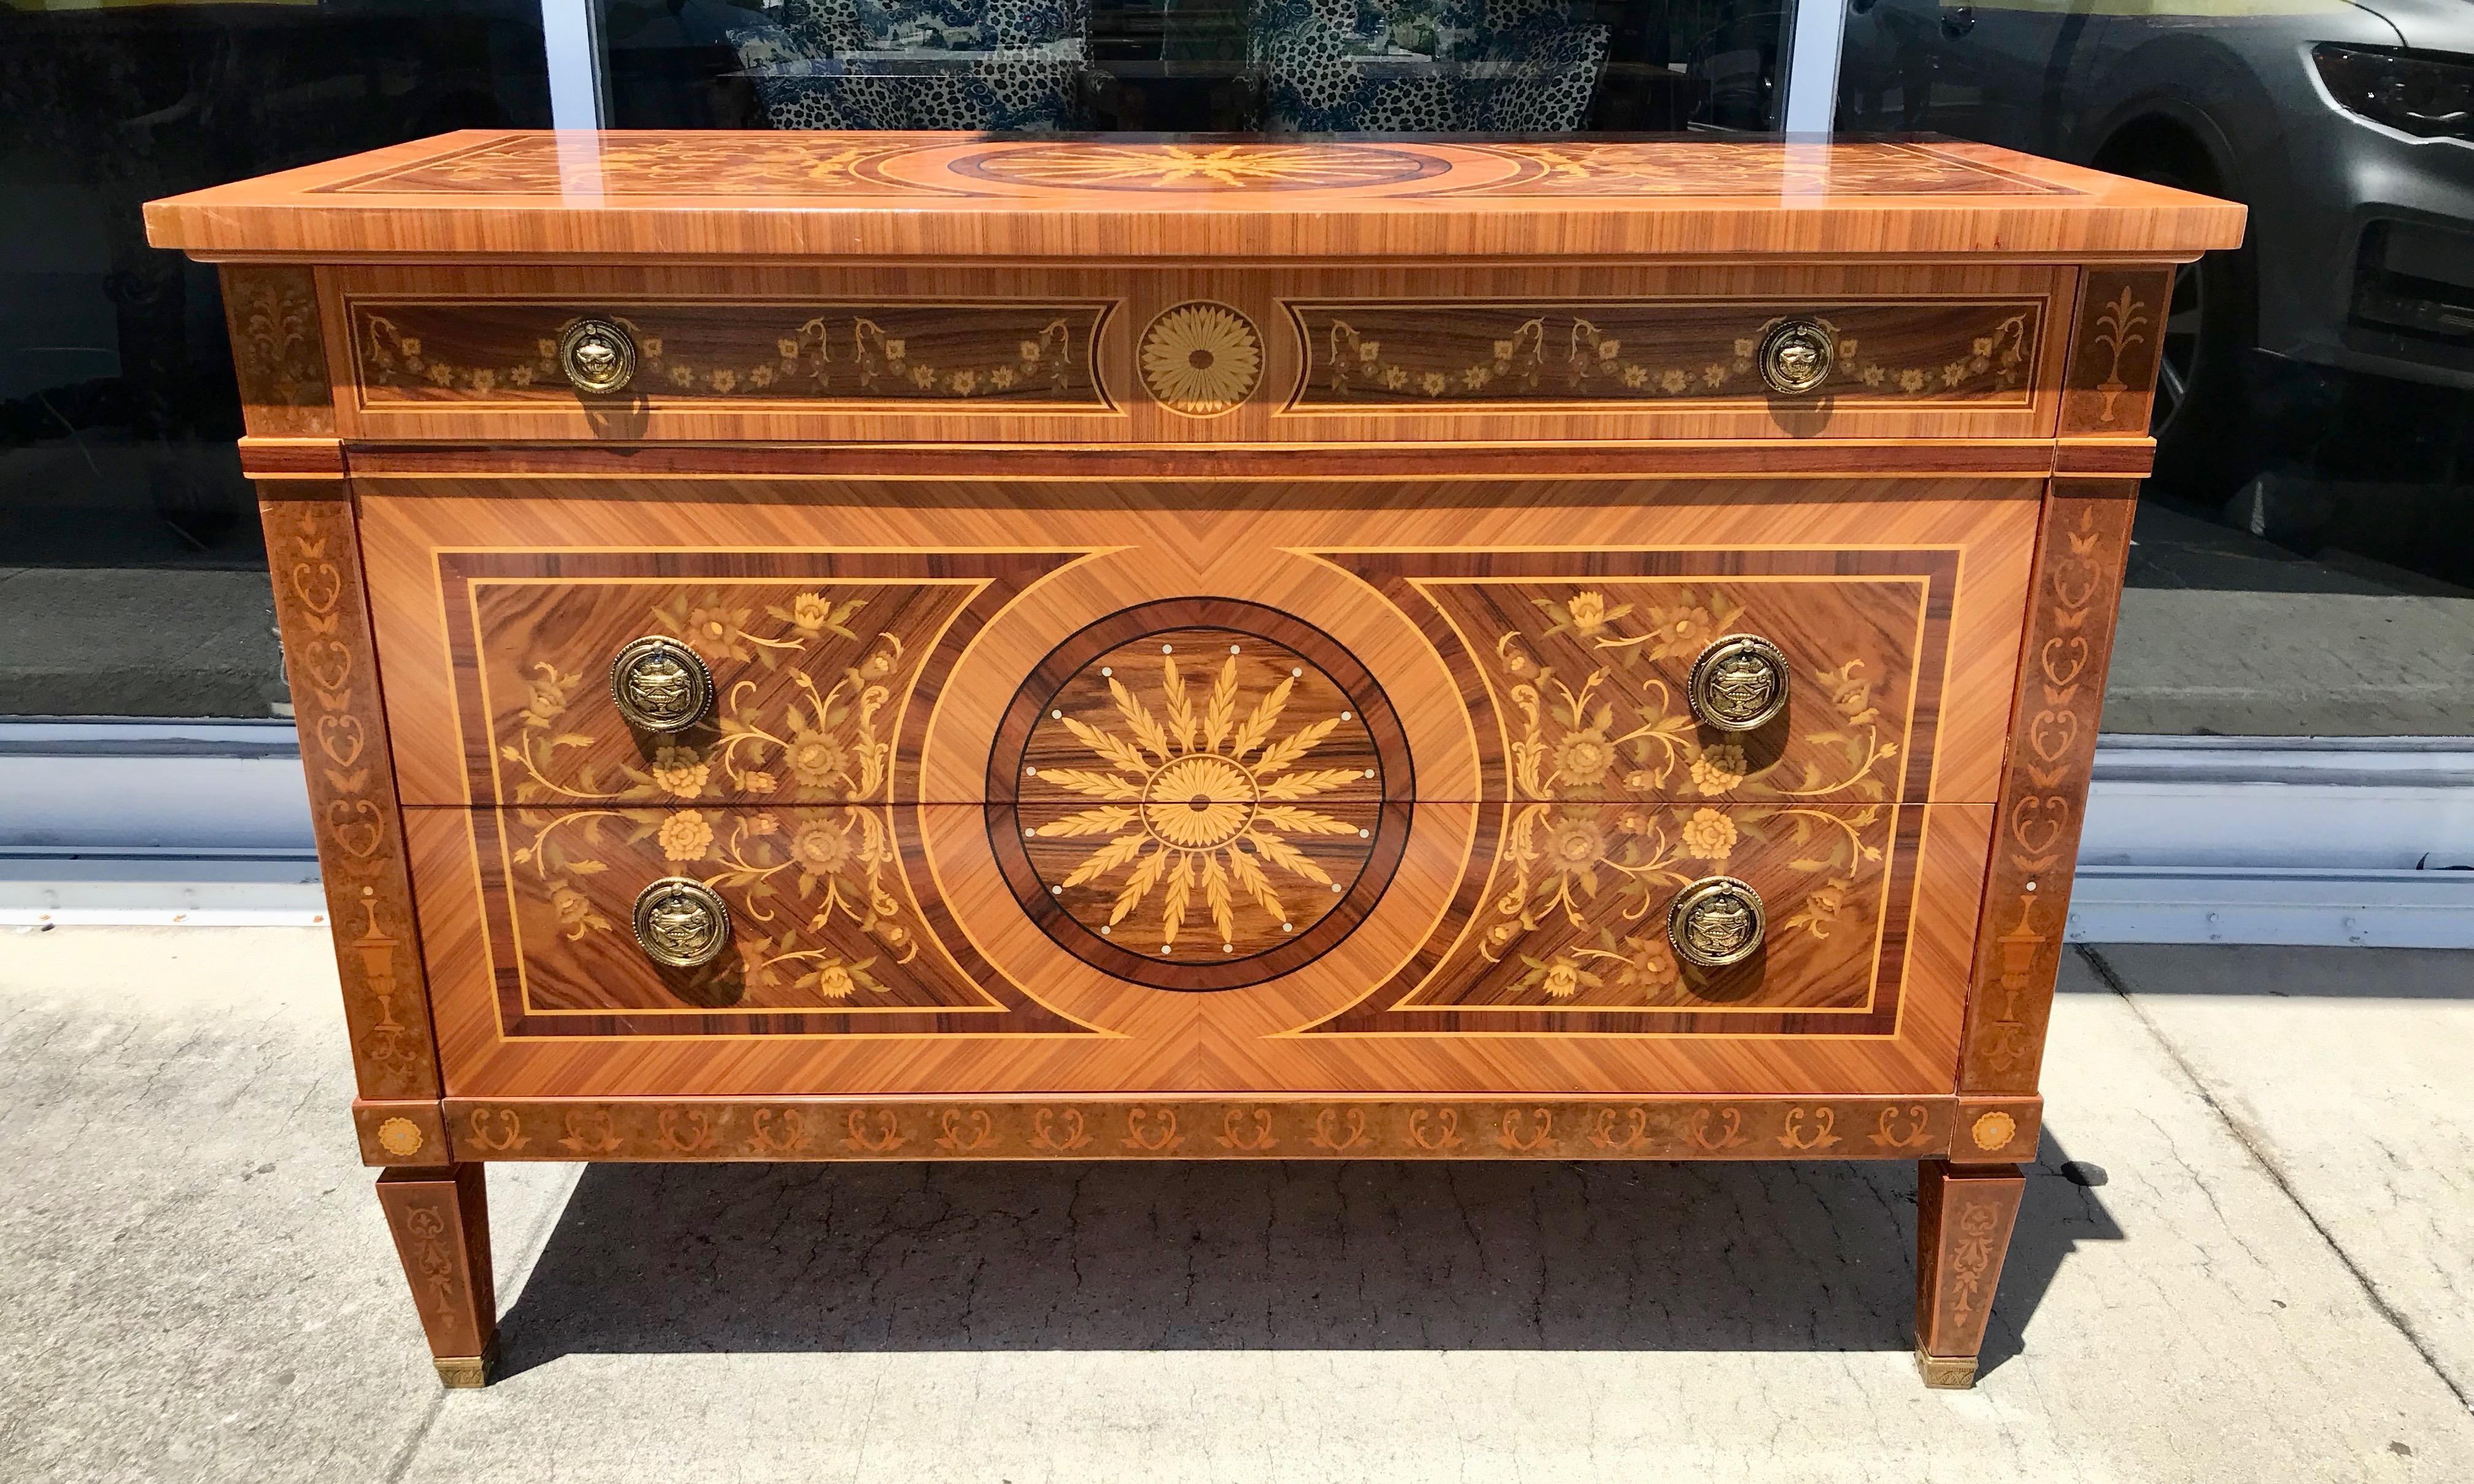 Exquisitely inlaid with various fruitwoods of magnificent scale and proportions.
The piece features a central sunburst with adjacent foliate embellishments .
In addition, the sides are inlaid with an abundance of florals.
A central 